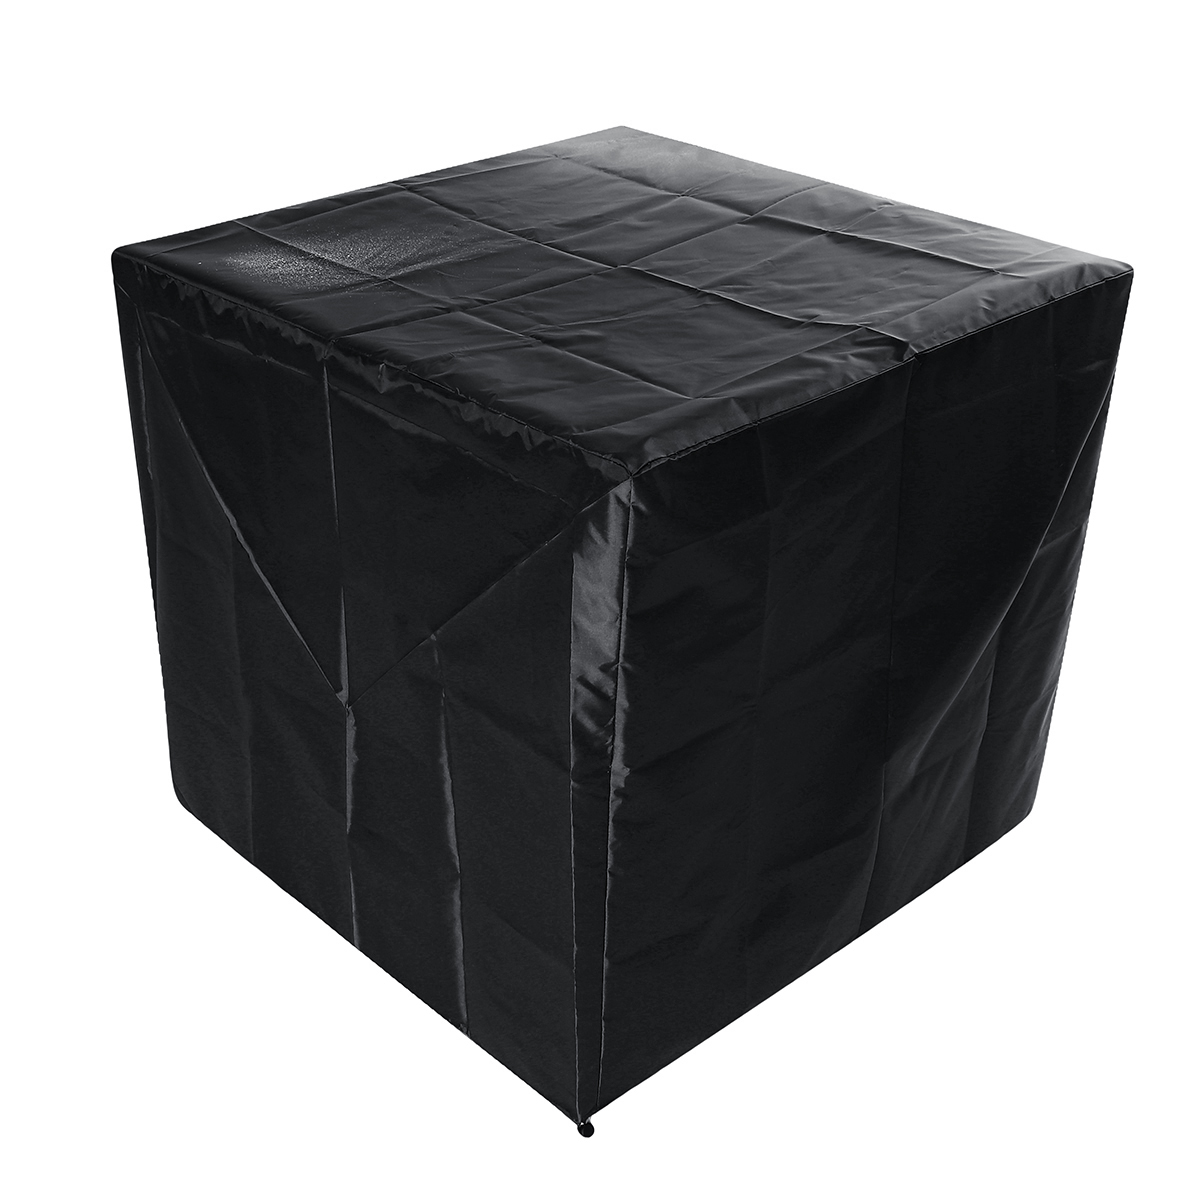 34times34times30-Inch-Air-Conditioner-Cover-Furniture-Waterproof-Windproof-Tool-Storage-1571365-6